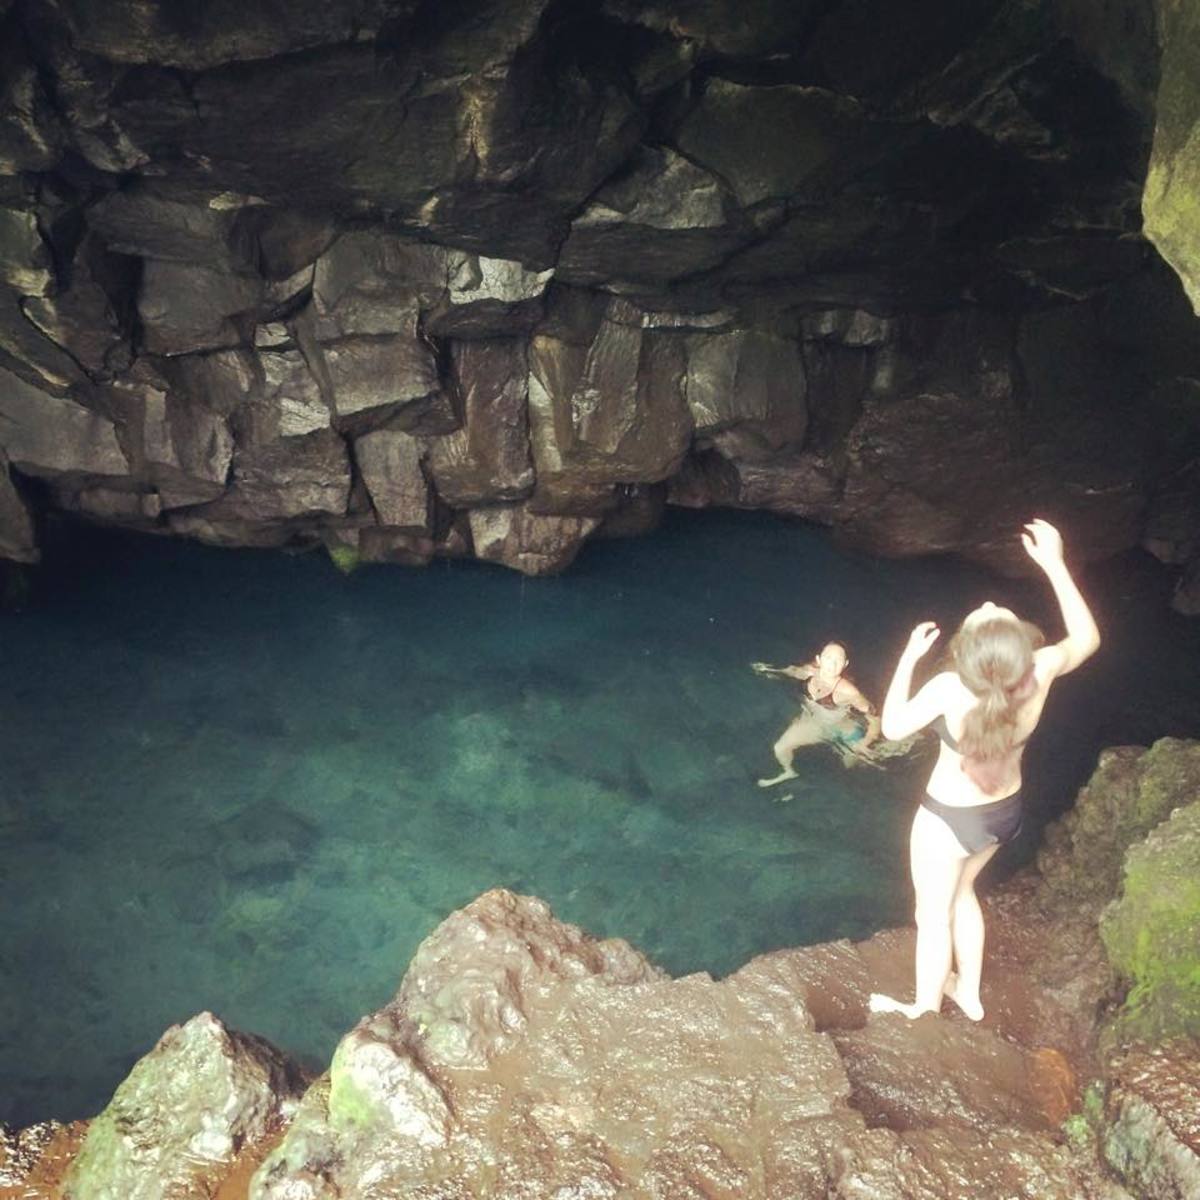 Everyone had to swim under the rock wall to get to the cave and it was dark. This little girl had more guts than I did!